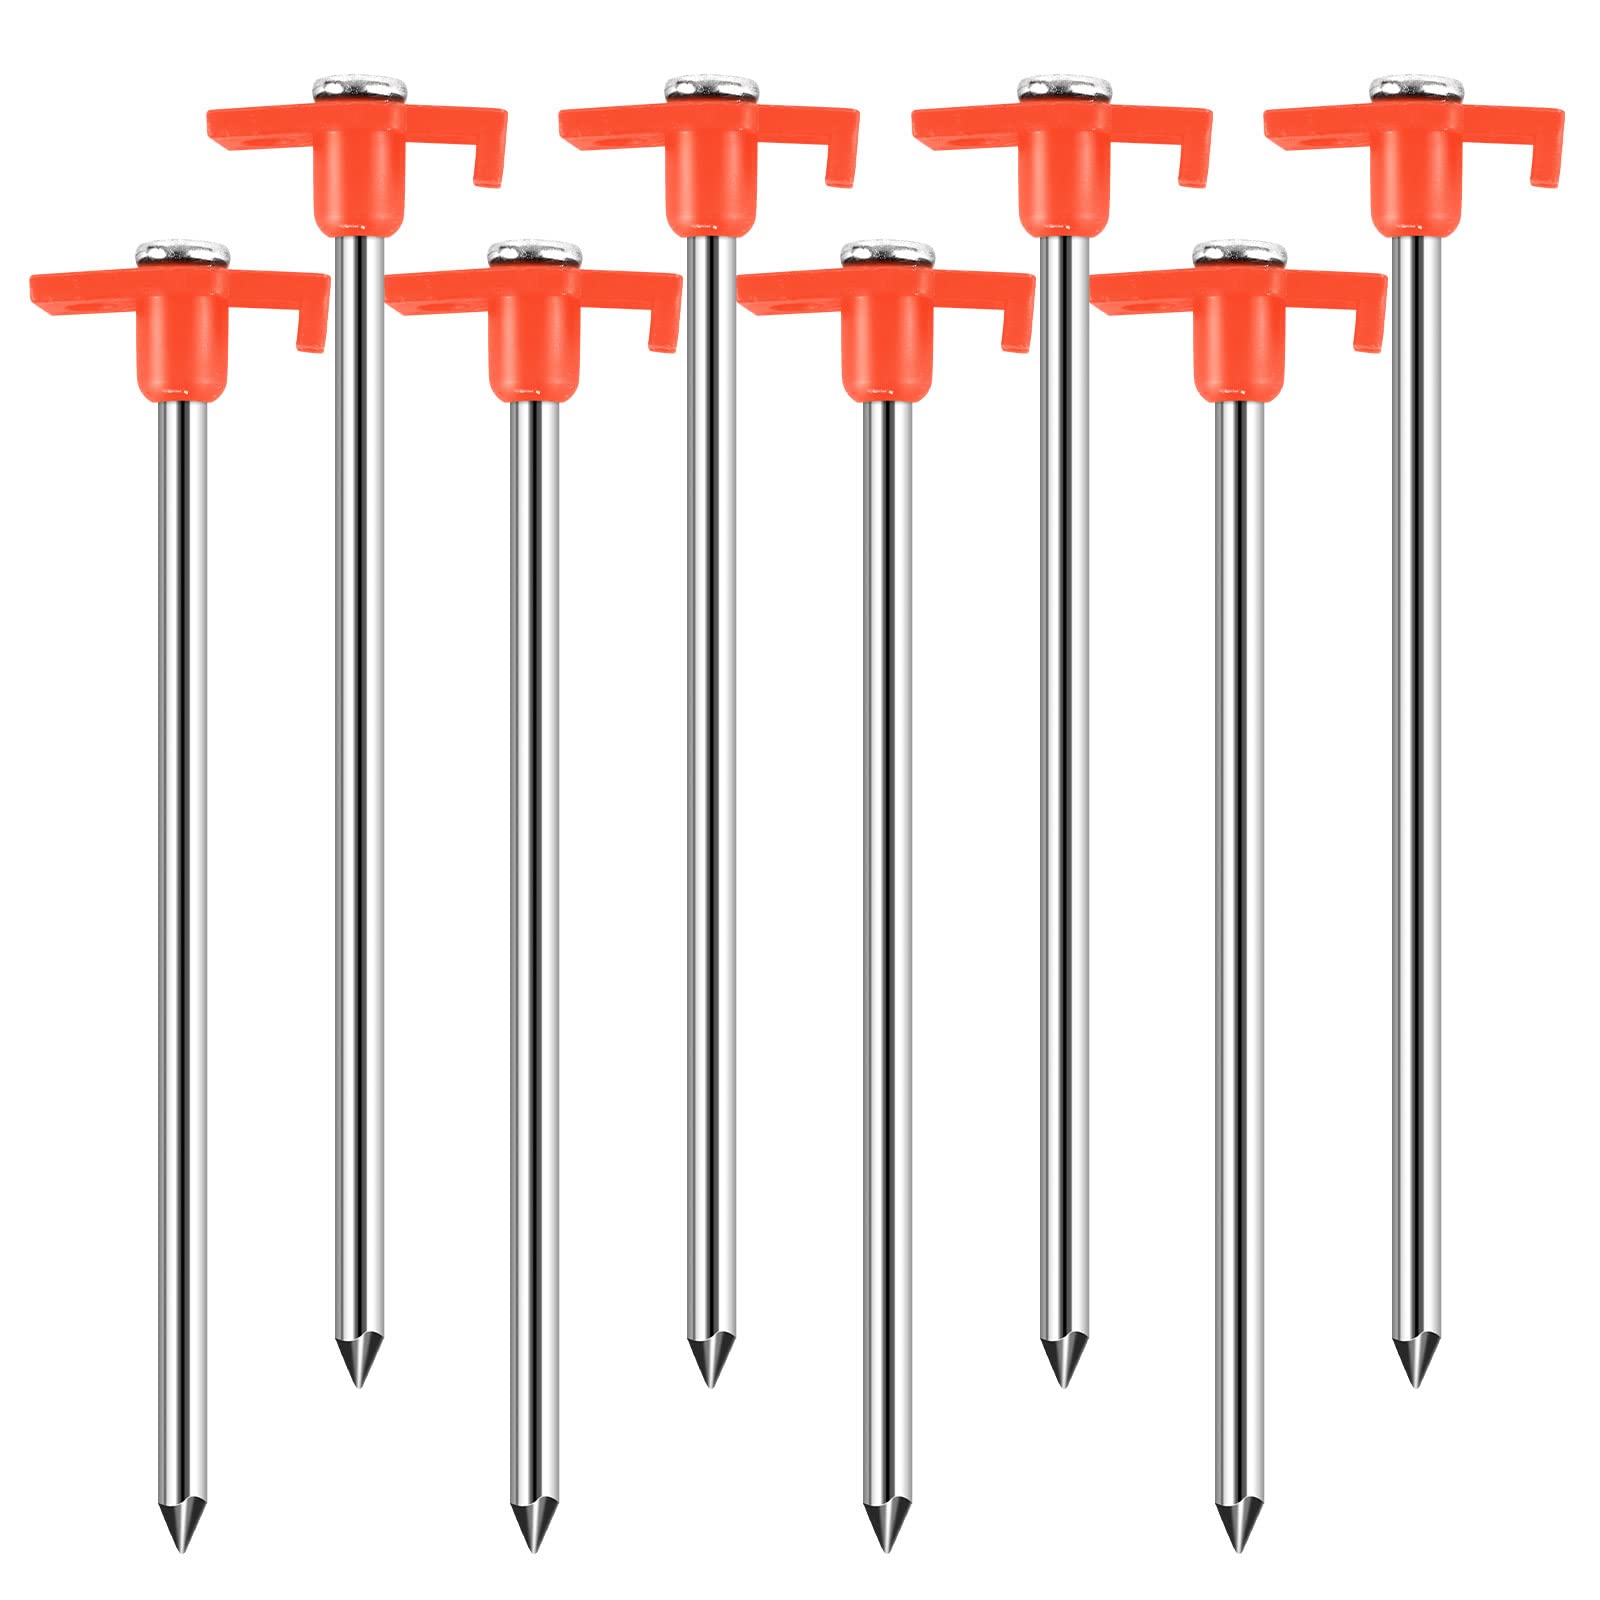 Tent Stakes Heavy Duty Tent Nail Camping Stakes Tent pegs for Pop Up Canopy  Ground Garden 10 Galvanized Steel Stakes 8pc-Pack (Orange)